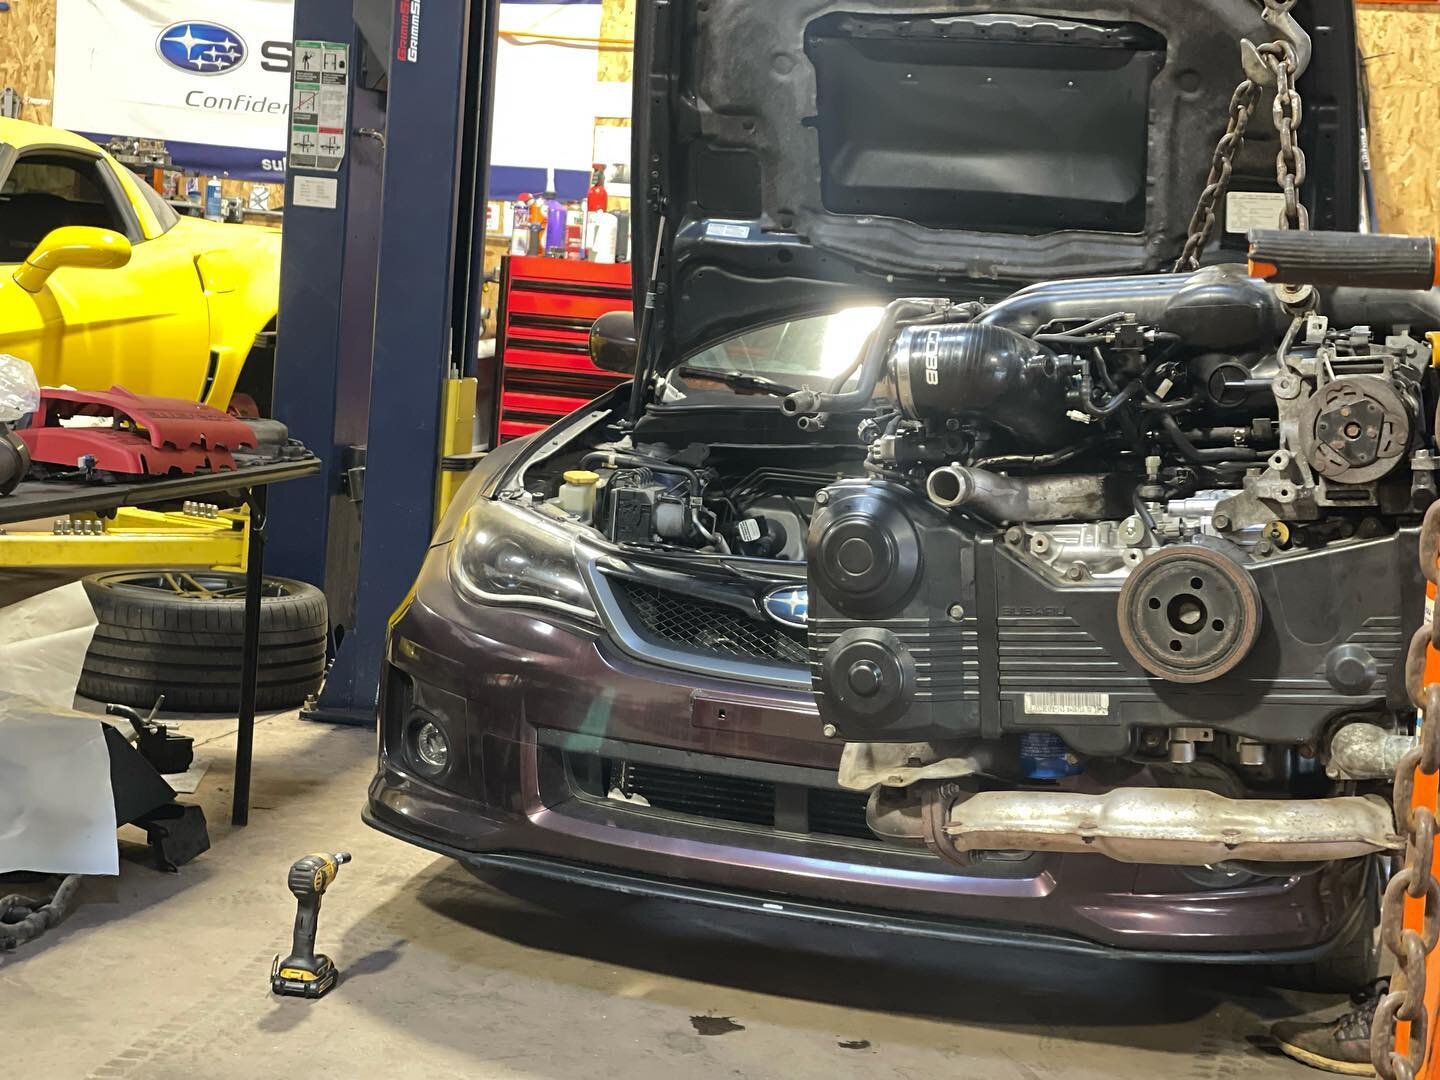 Motor in on this gorgeous WRX, six speed swapped, and brembos!